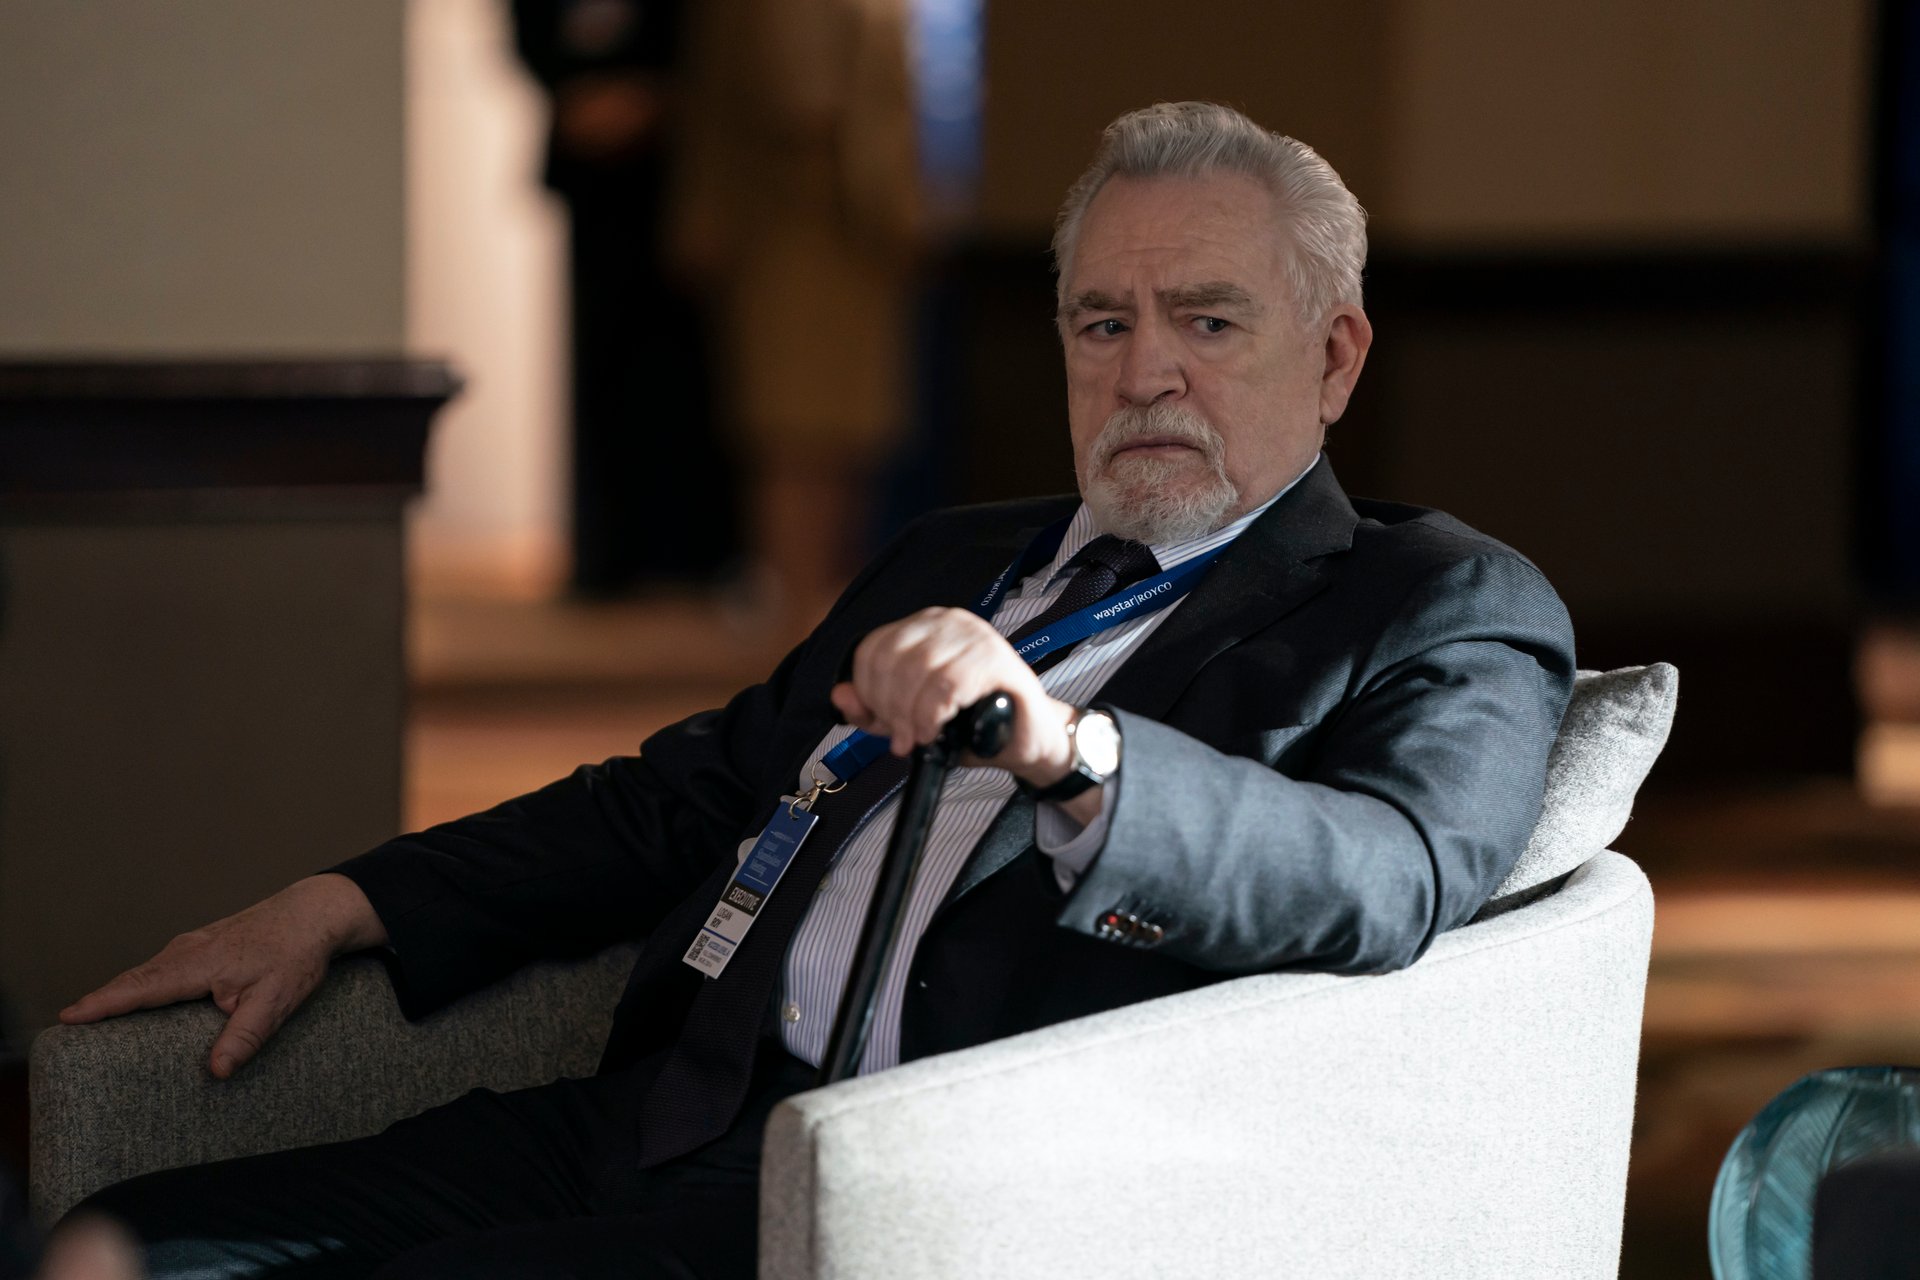 Brian Cox as Logan Roy on Season 3 of Succession. He's wearing a suit, sitting on a beige chair and looking annoyed.